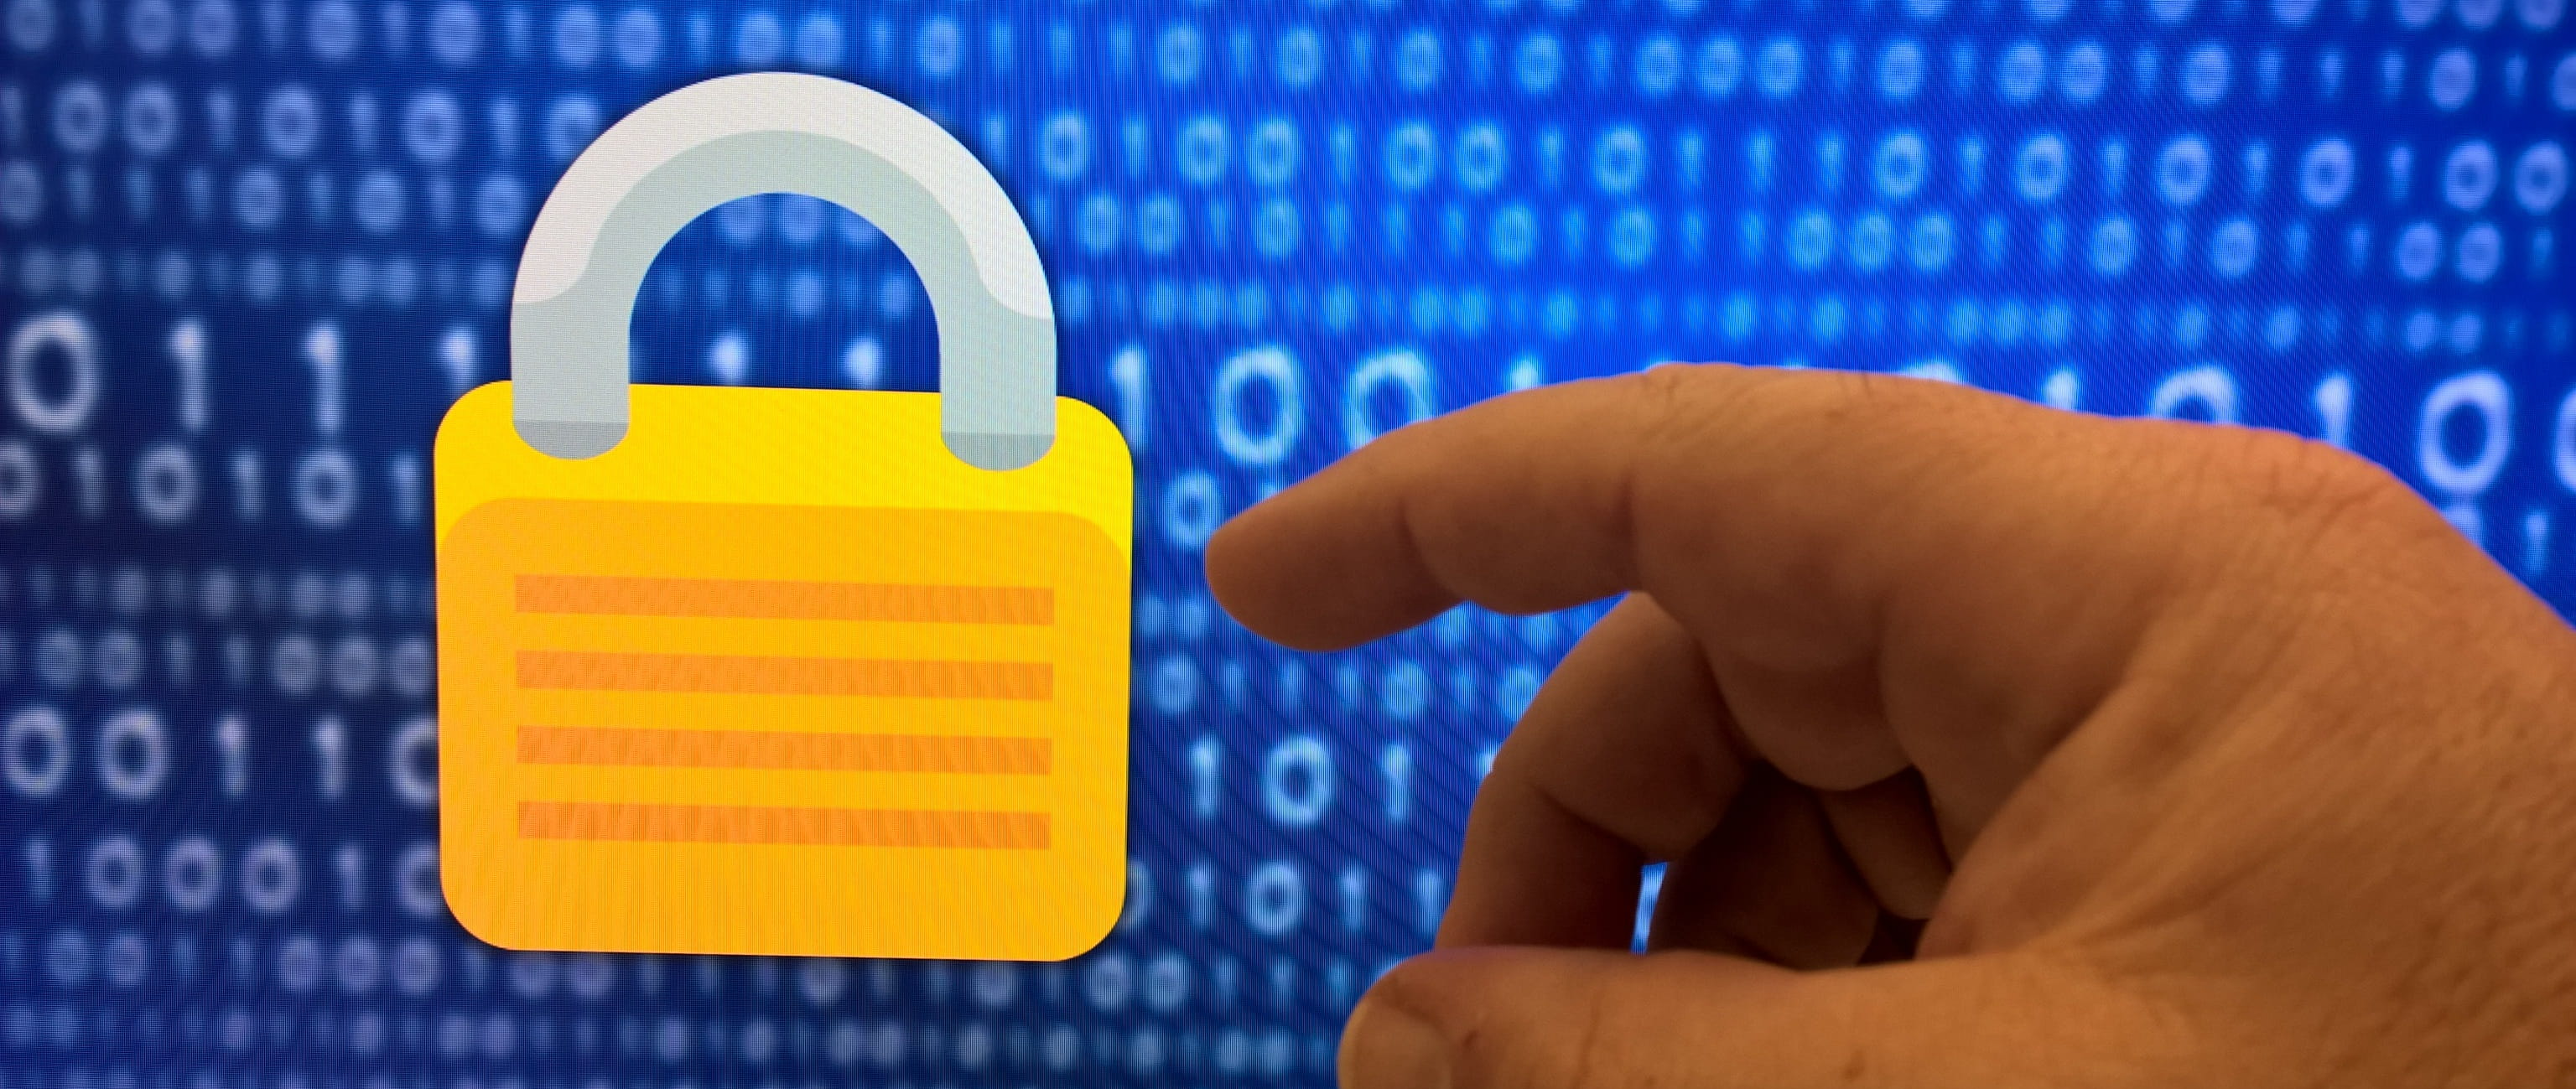 Image of a yellow padlock on blue background